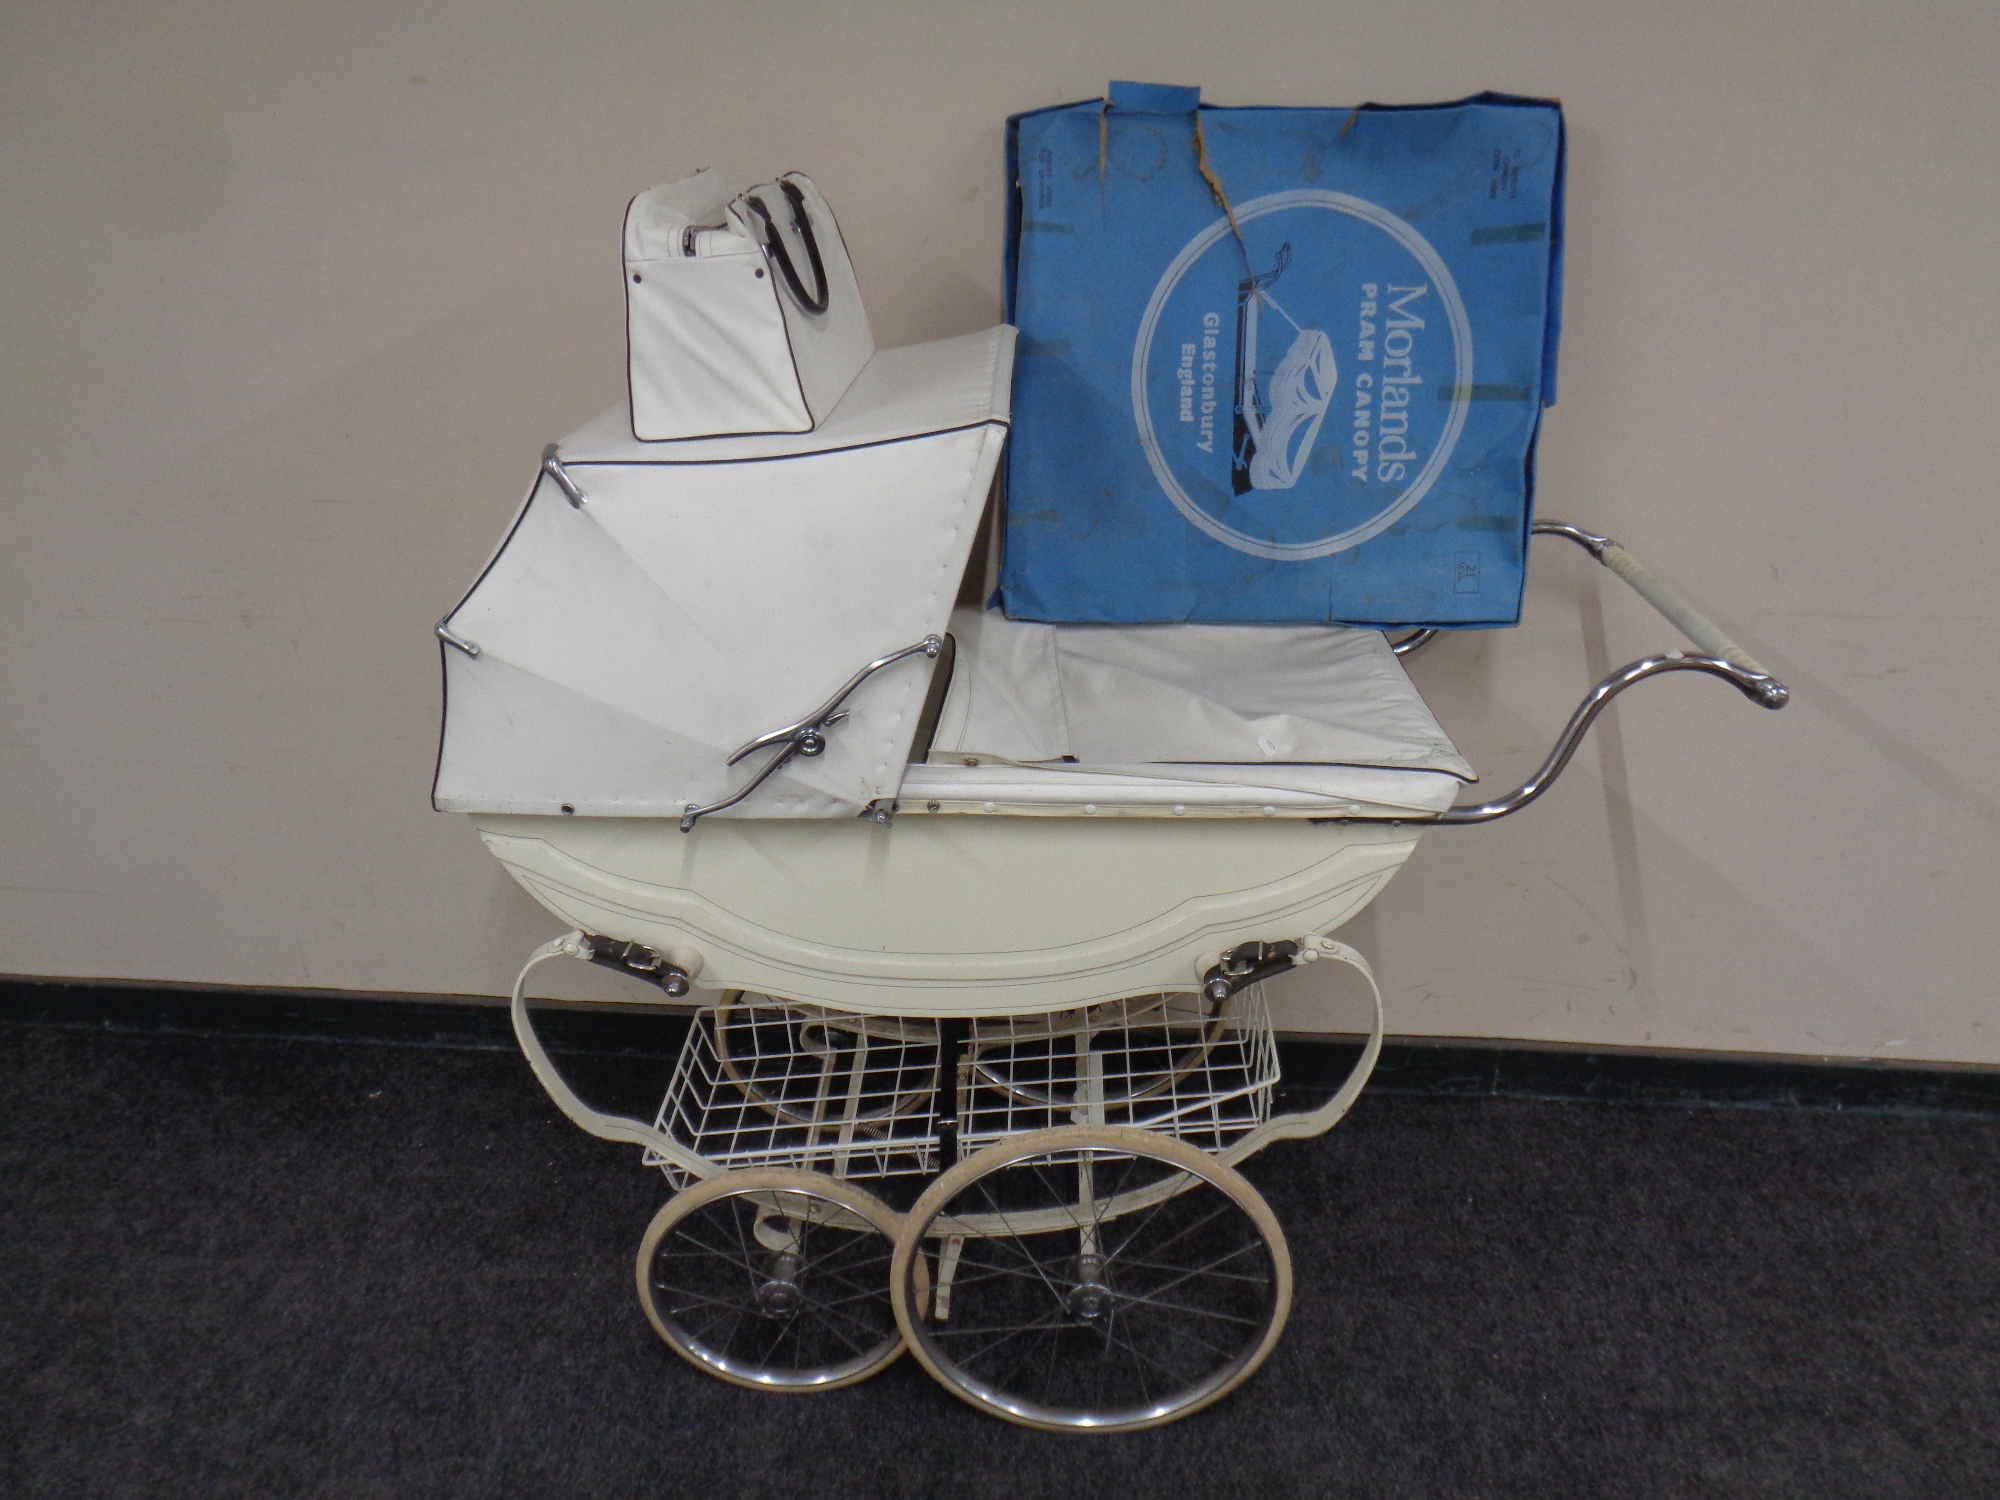 A Fetha-Lite pram together with the matching leather bag